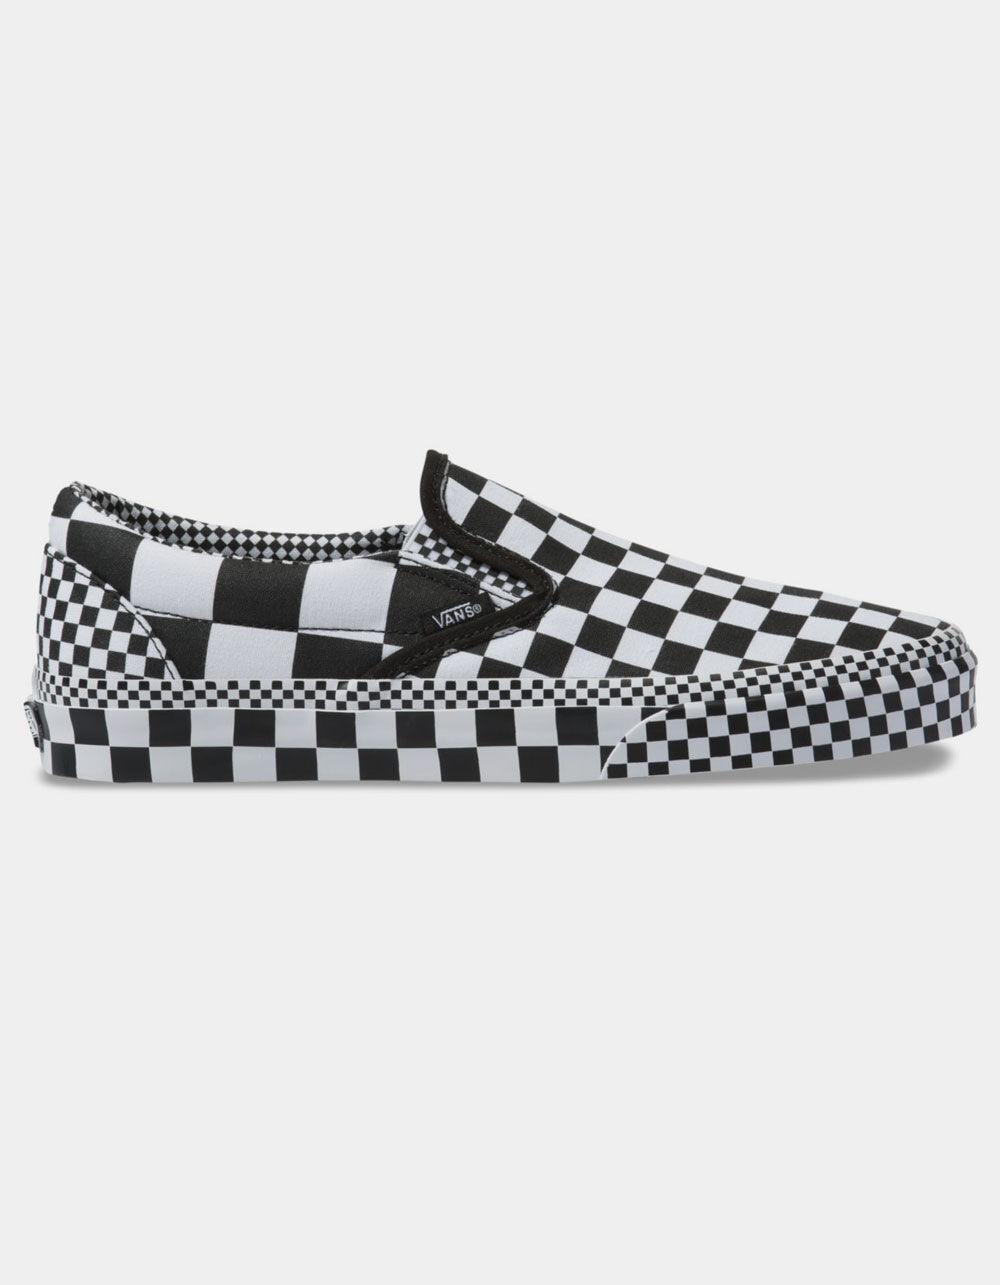 Vans Canvas All Over Checkerboard Classic Slip-on Shoes in Black - Lyst